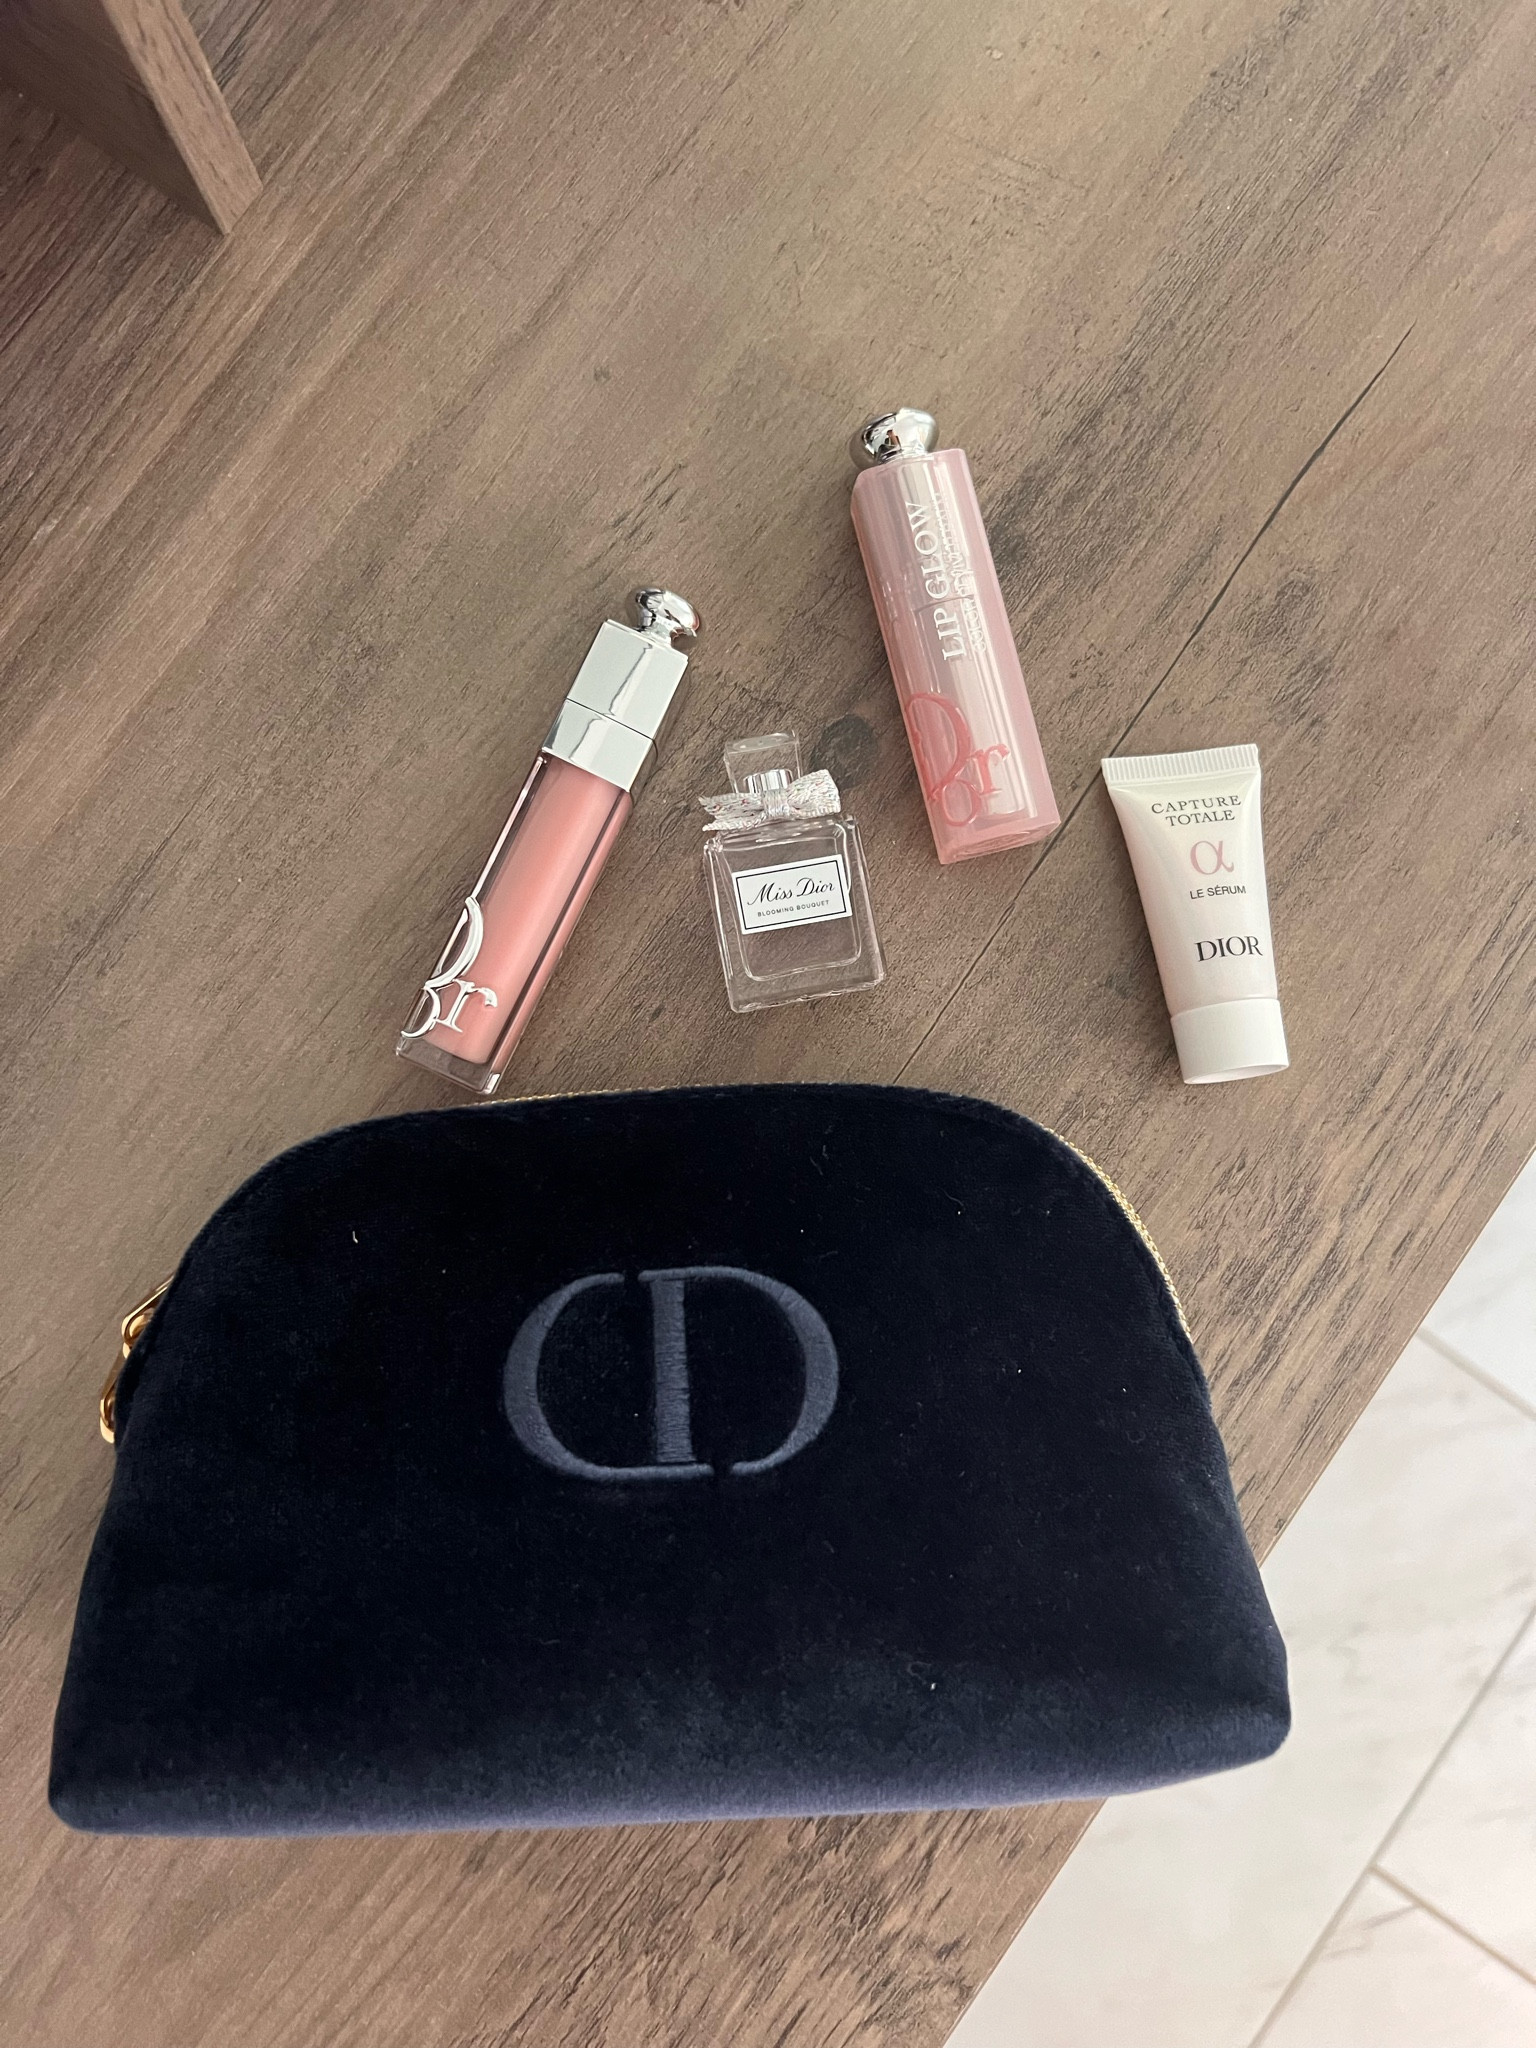 Dior Addict the beauty ritual curated on LTK